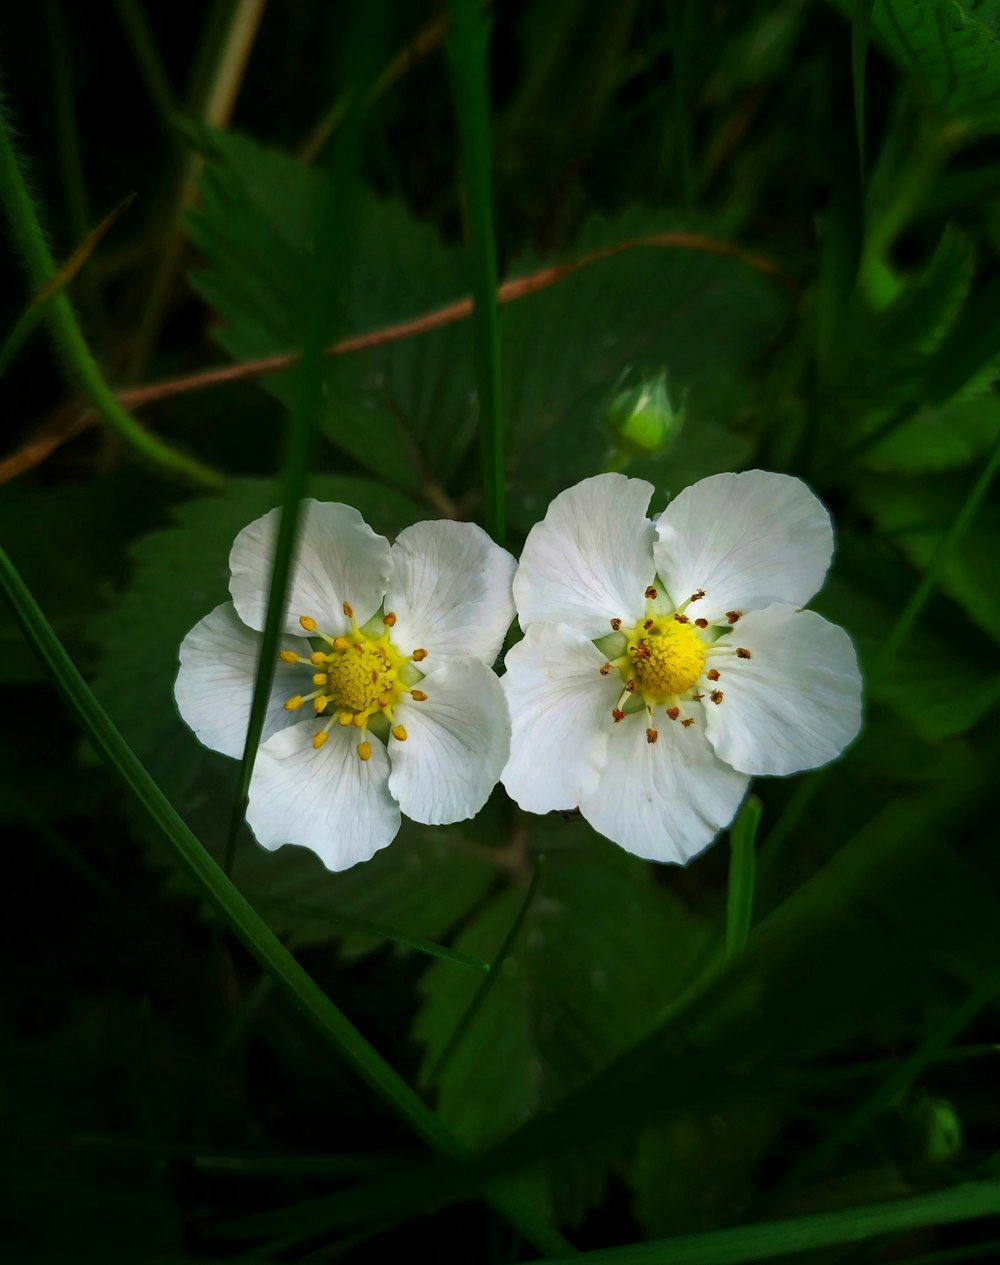 two white flowers with yellow centers in the grass